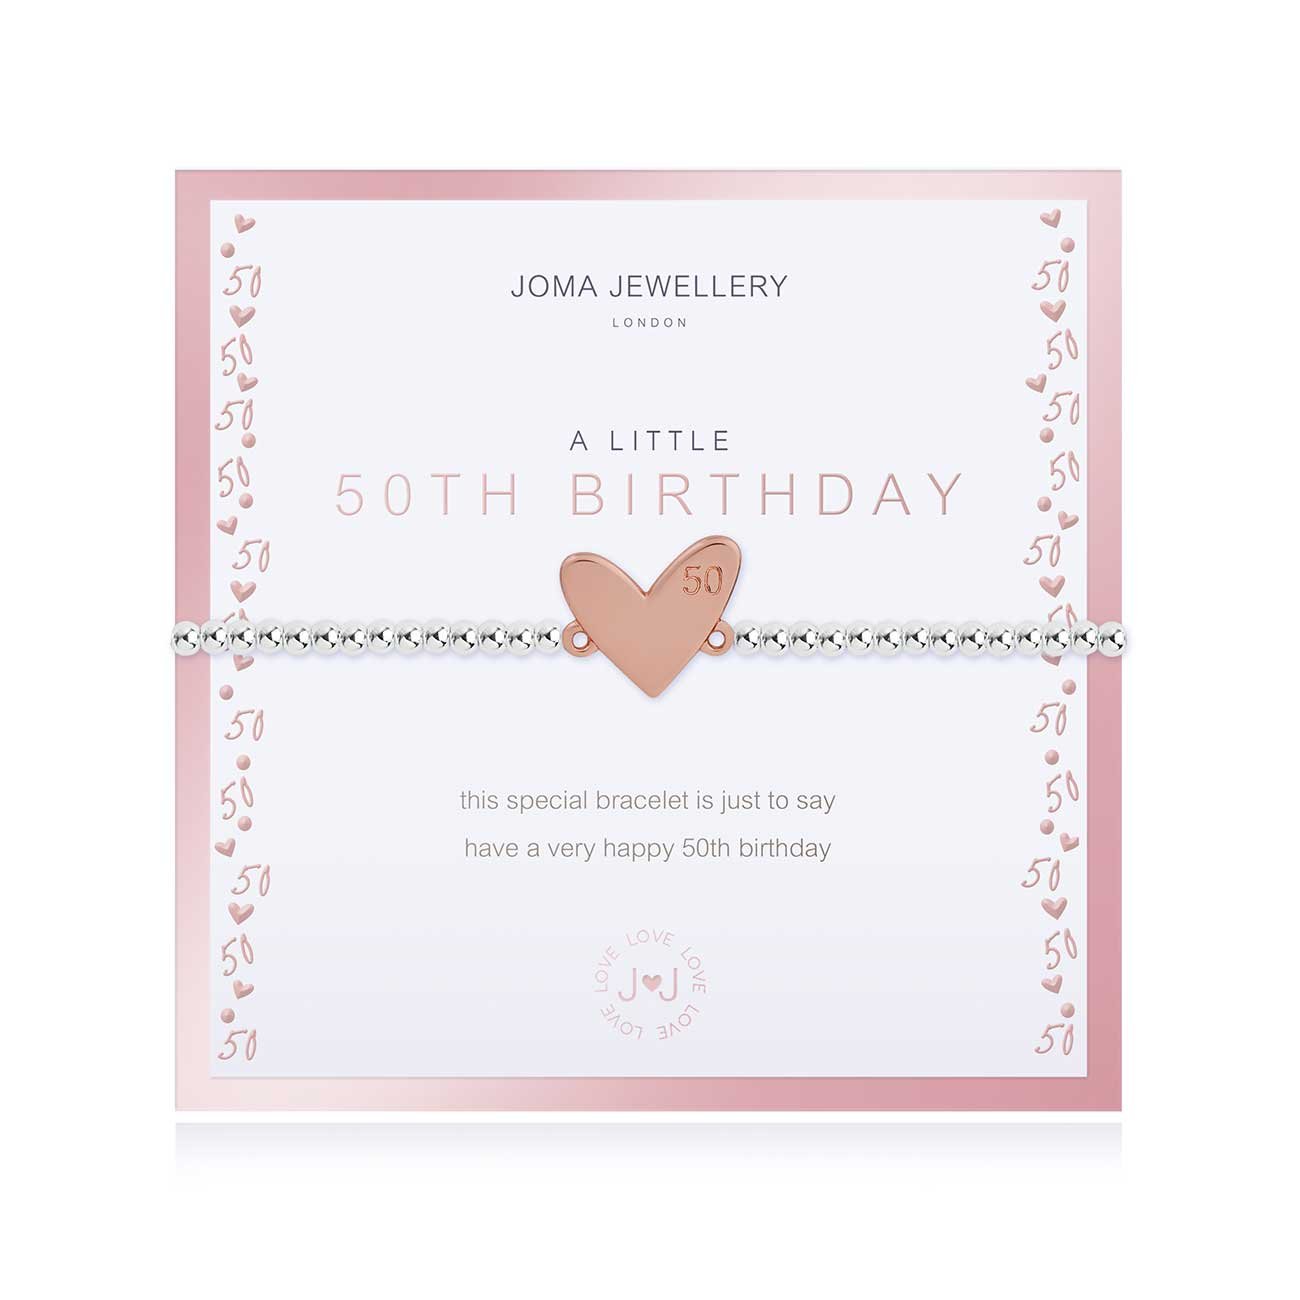 Joma Jewellery Boxed a little 50th Birthday